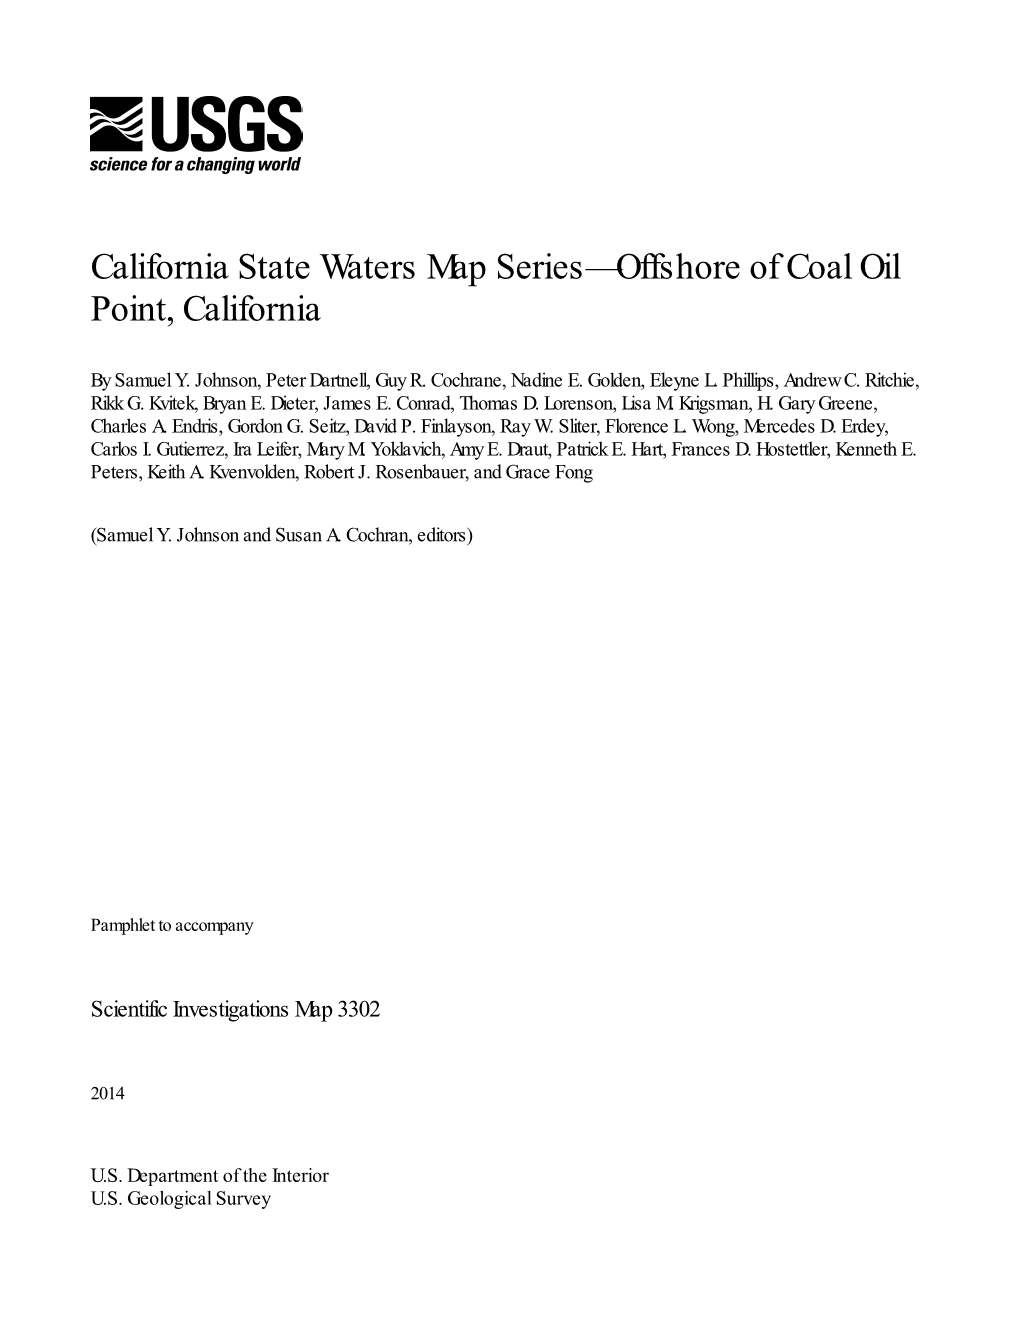 Offshore of Coal Oil Point, California